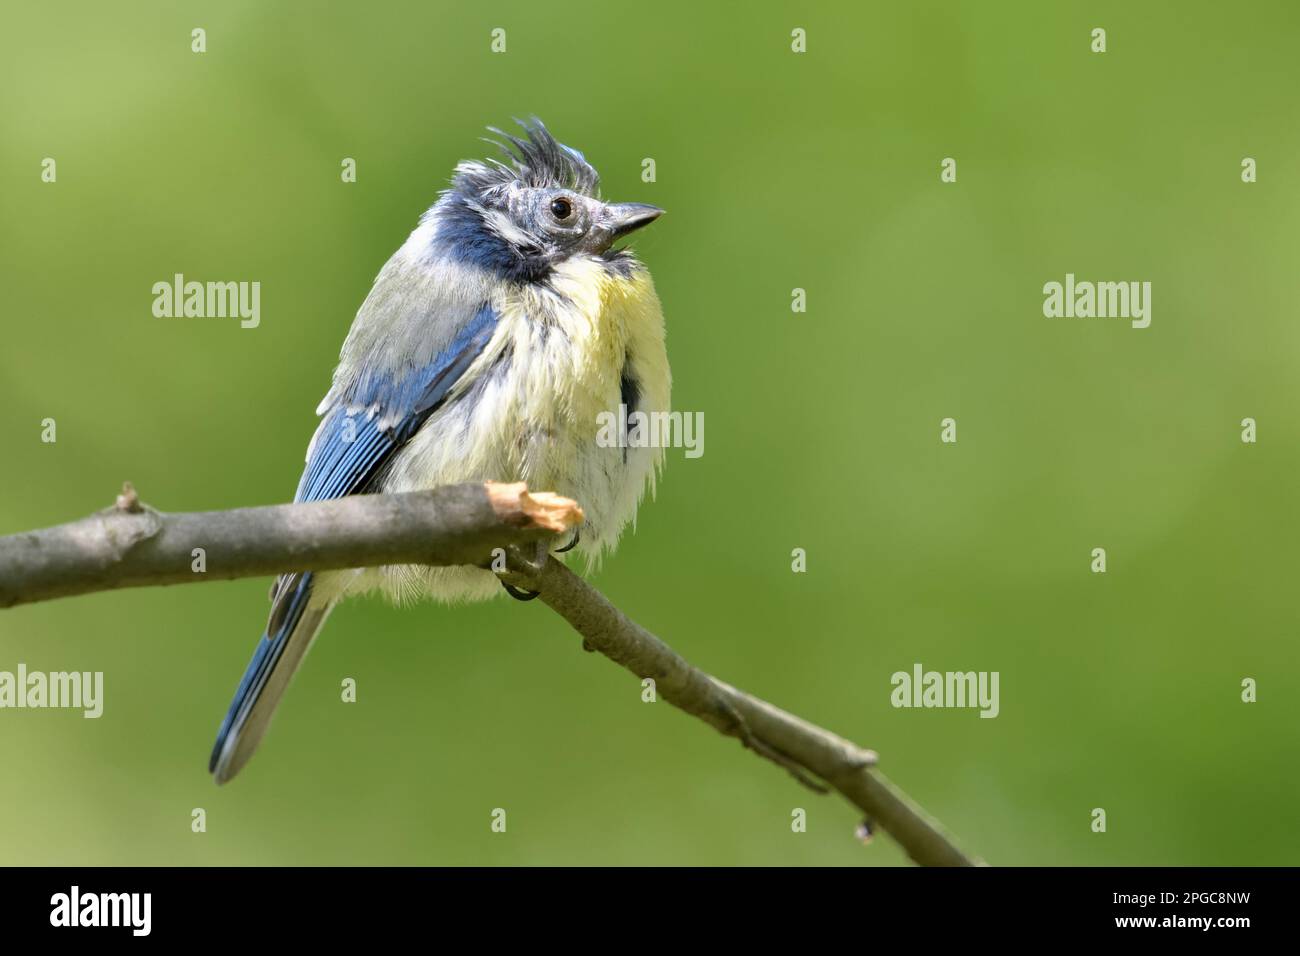 Bluetit, seems to be ill, lost feathers at its head. Stock Photo